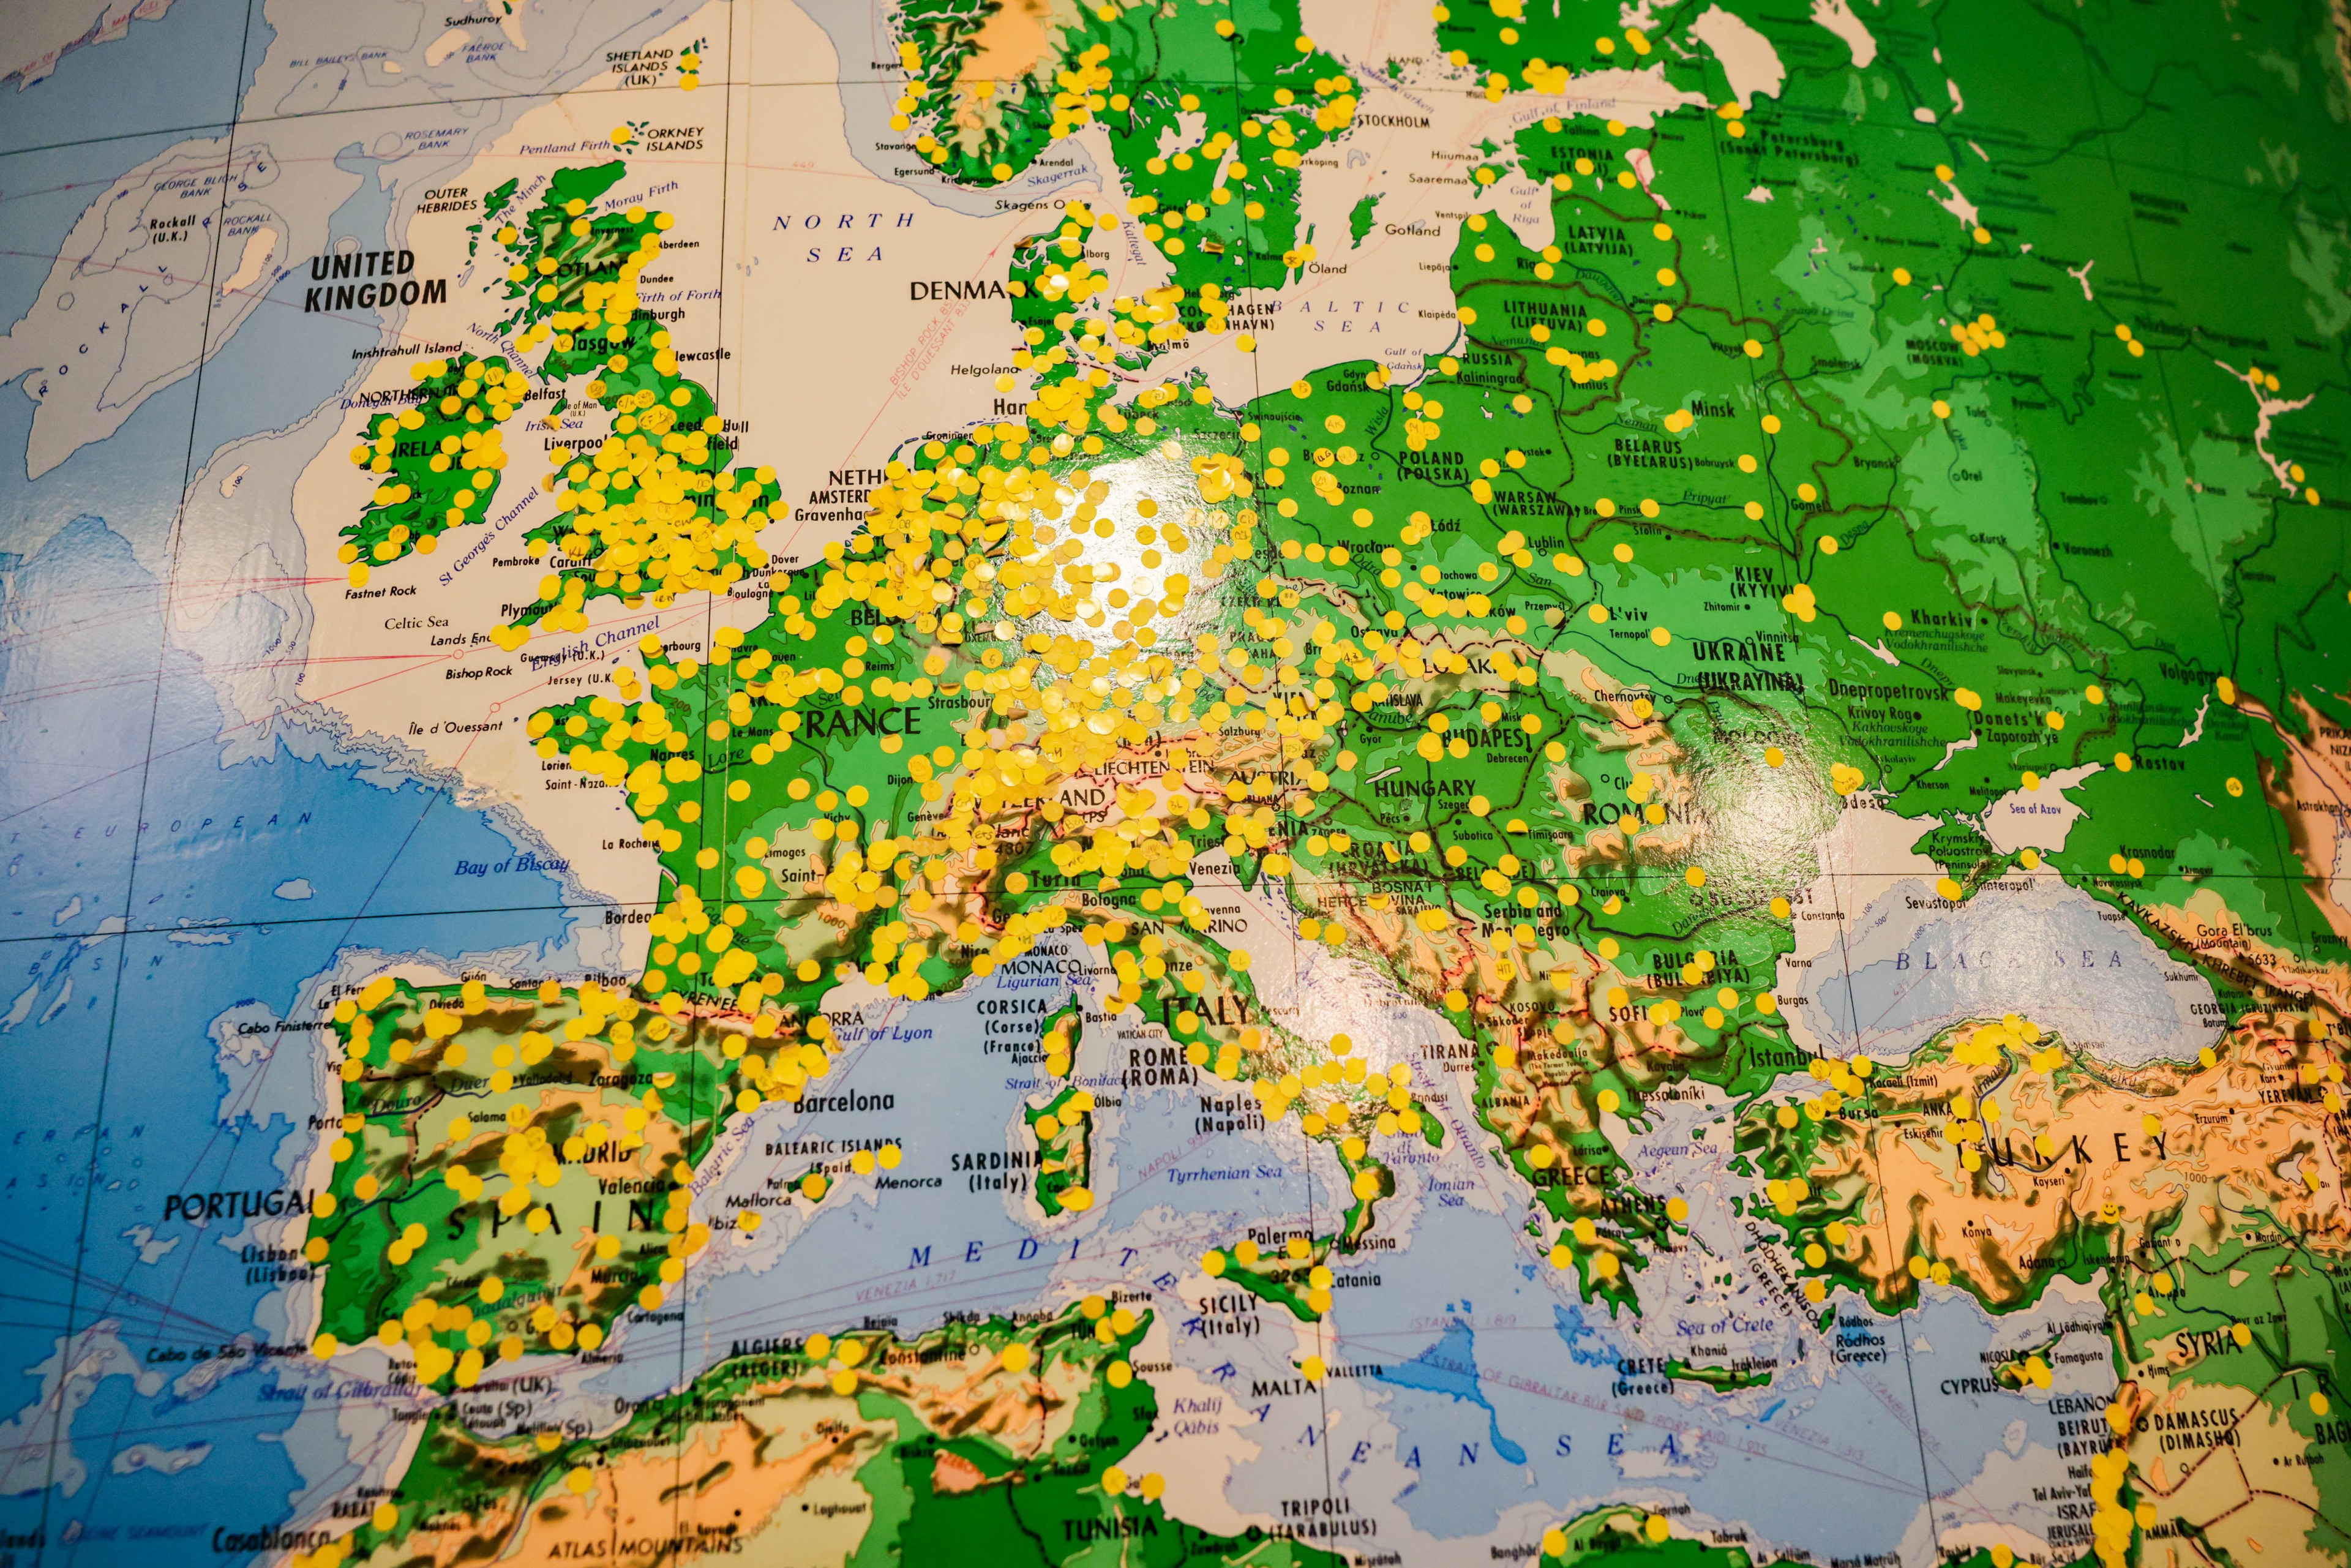 A map of Europe with numerous yellow and green pins marking locations across various countries.